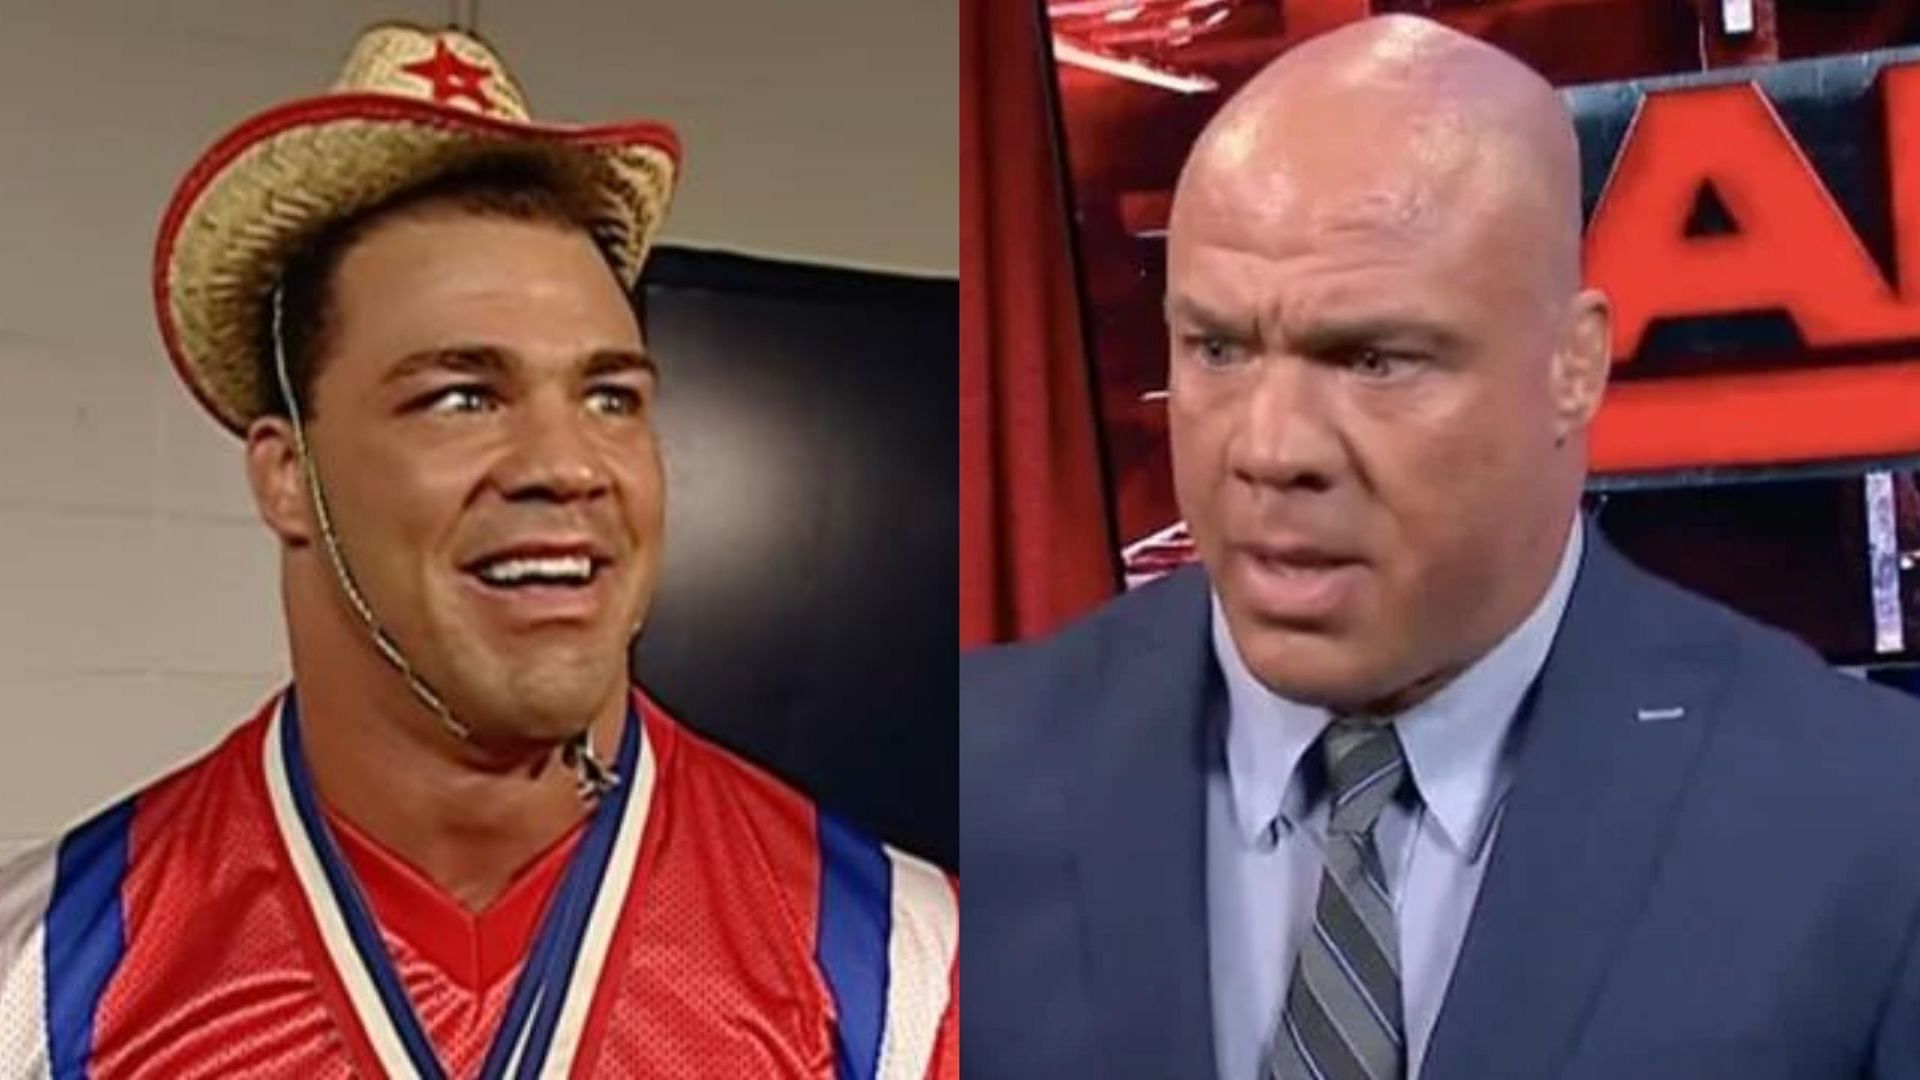 Kurt Angle tells a story how he got ribbed to look like a fool in public. 